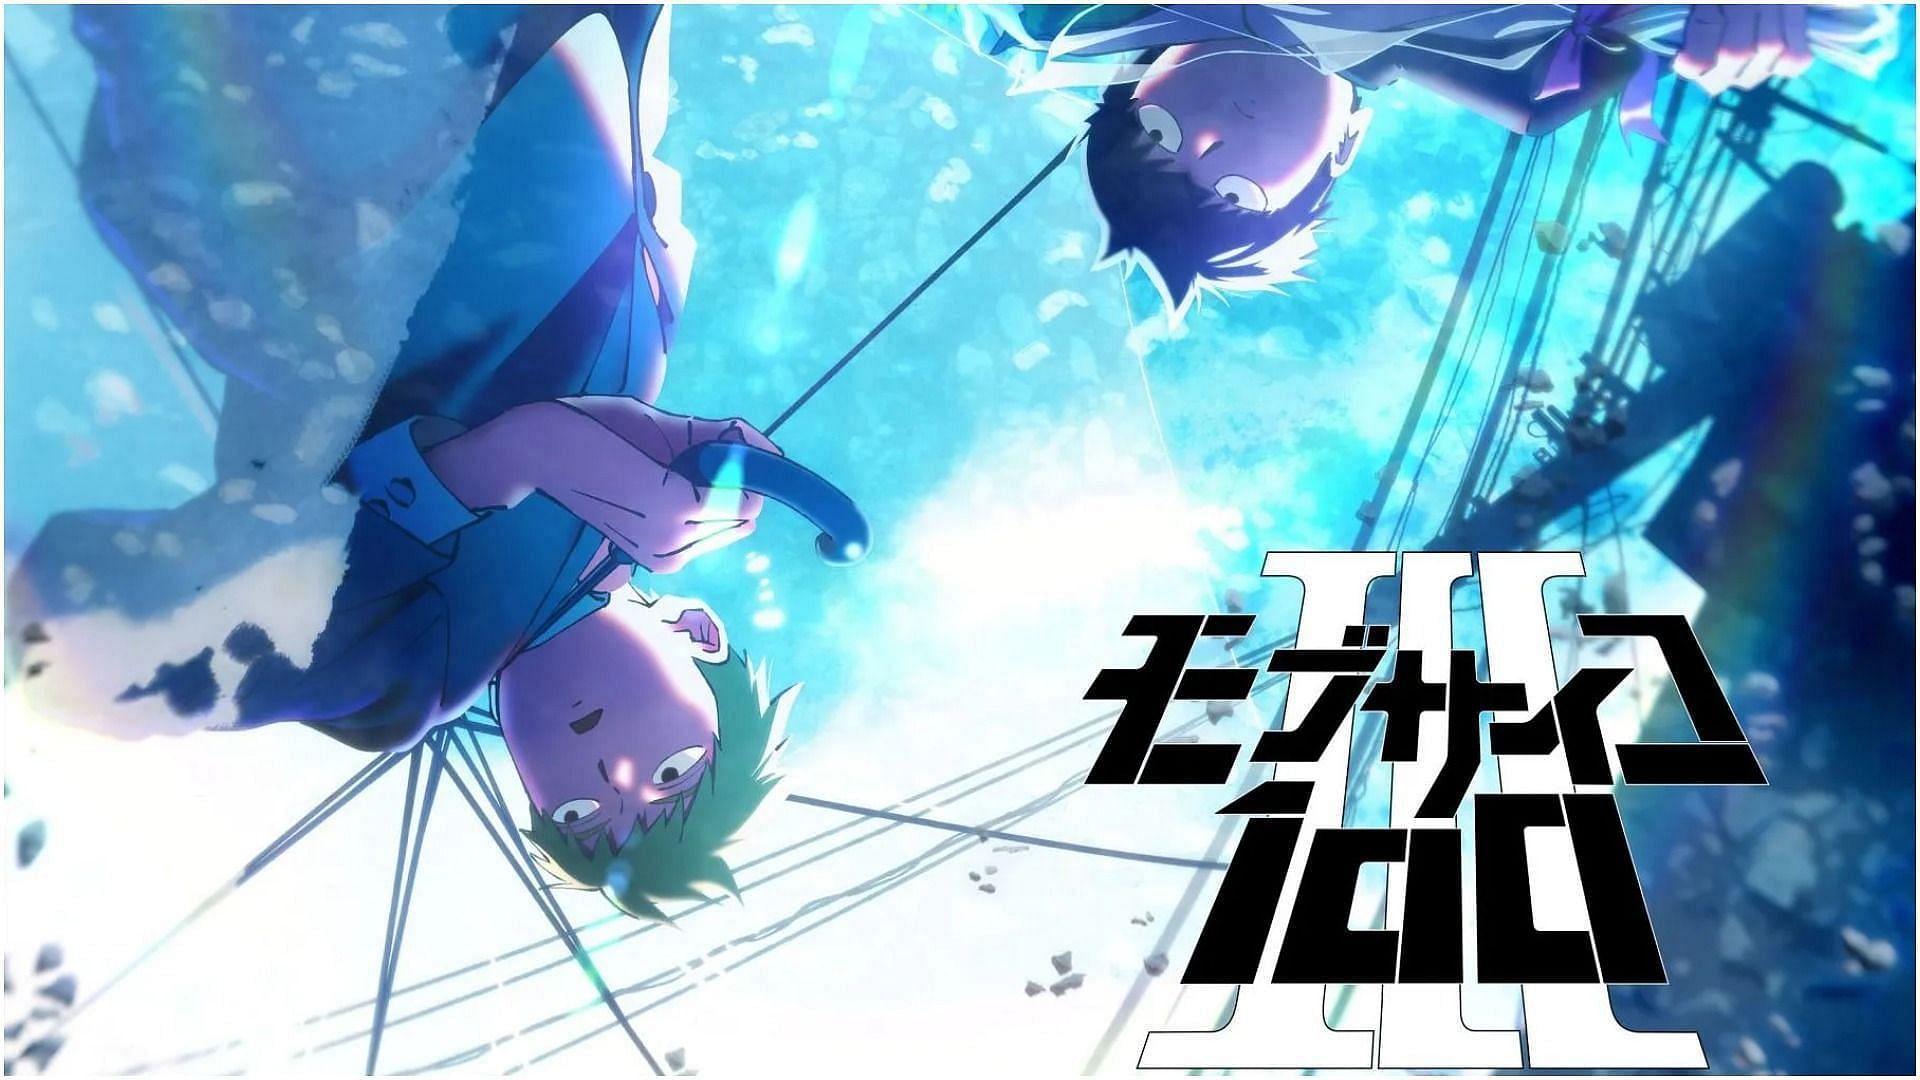 Anime Corner News - BREAKING: Mob Psycho 100 Season 3 revealed the opening  1 by MOB CHOIR! Watch and read more